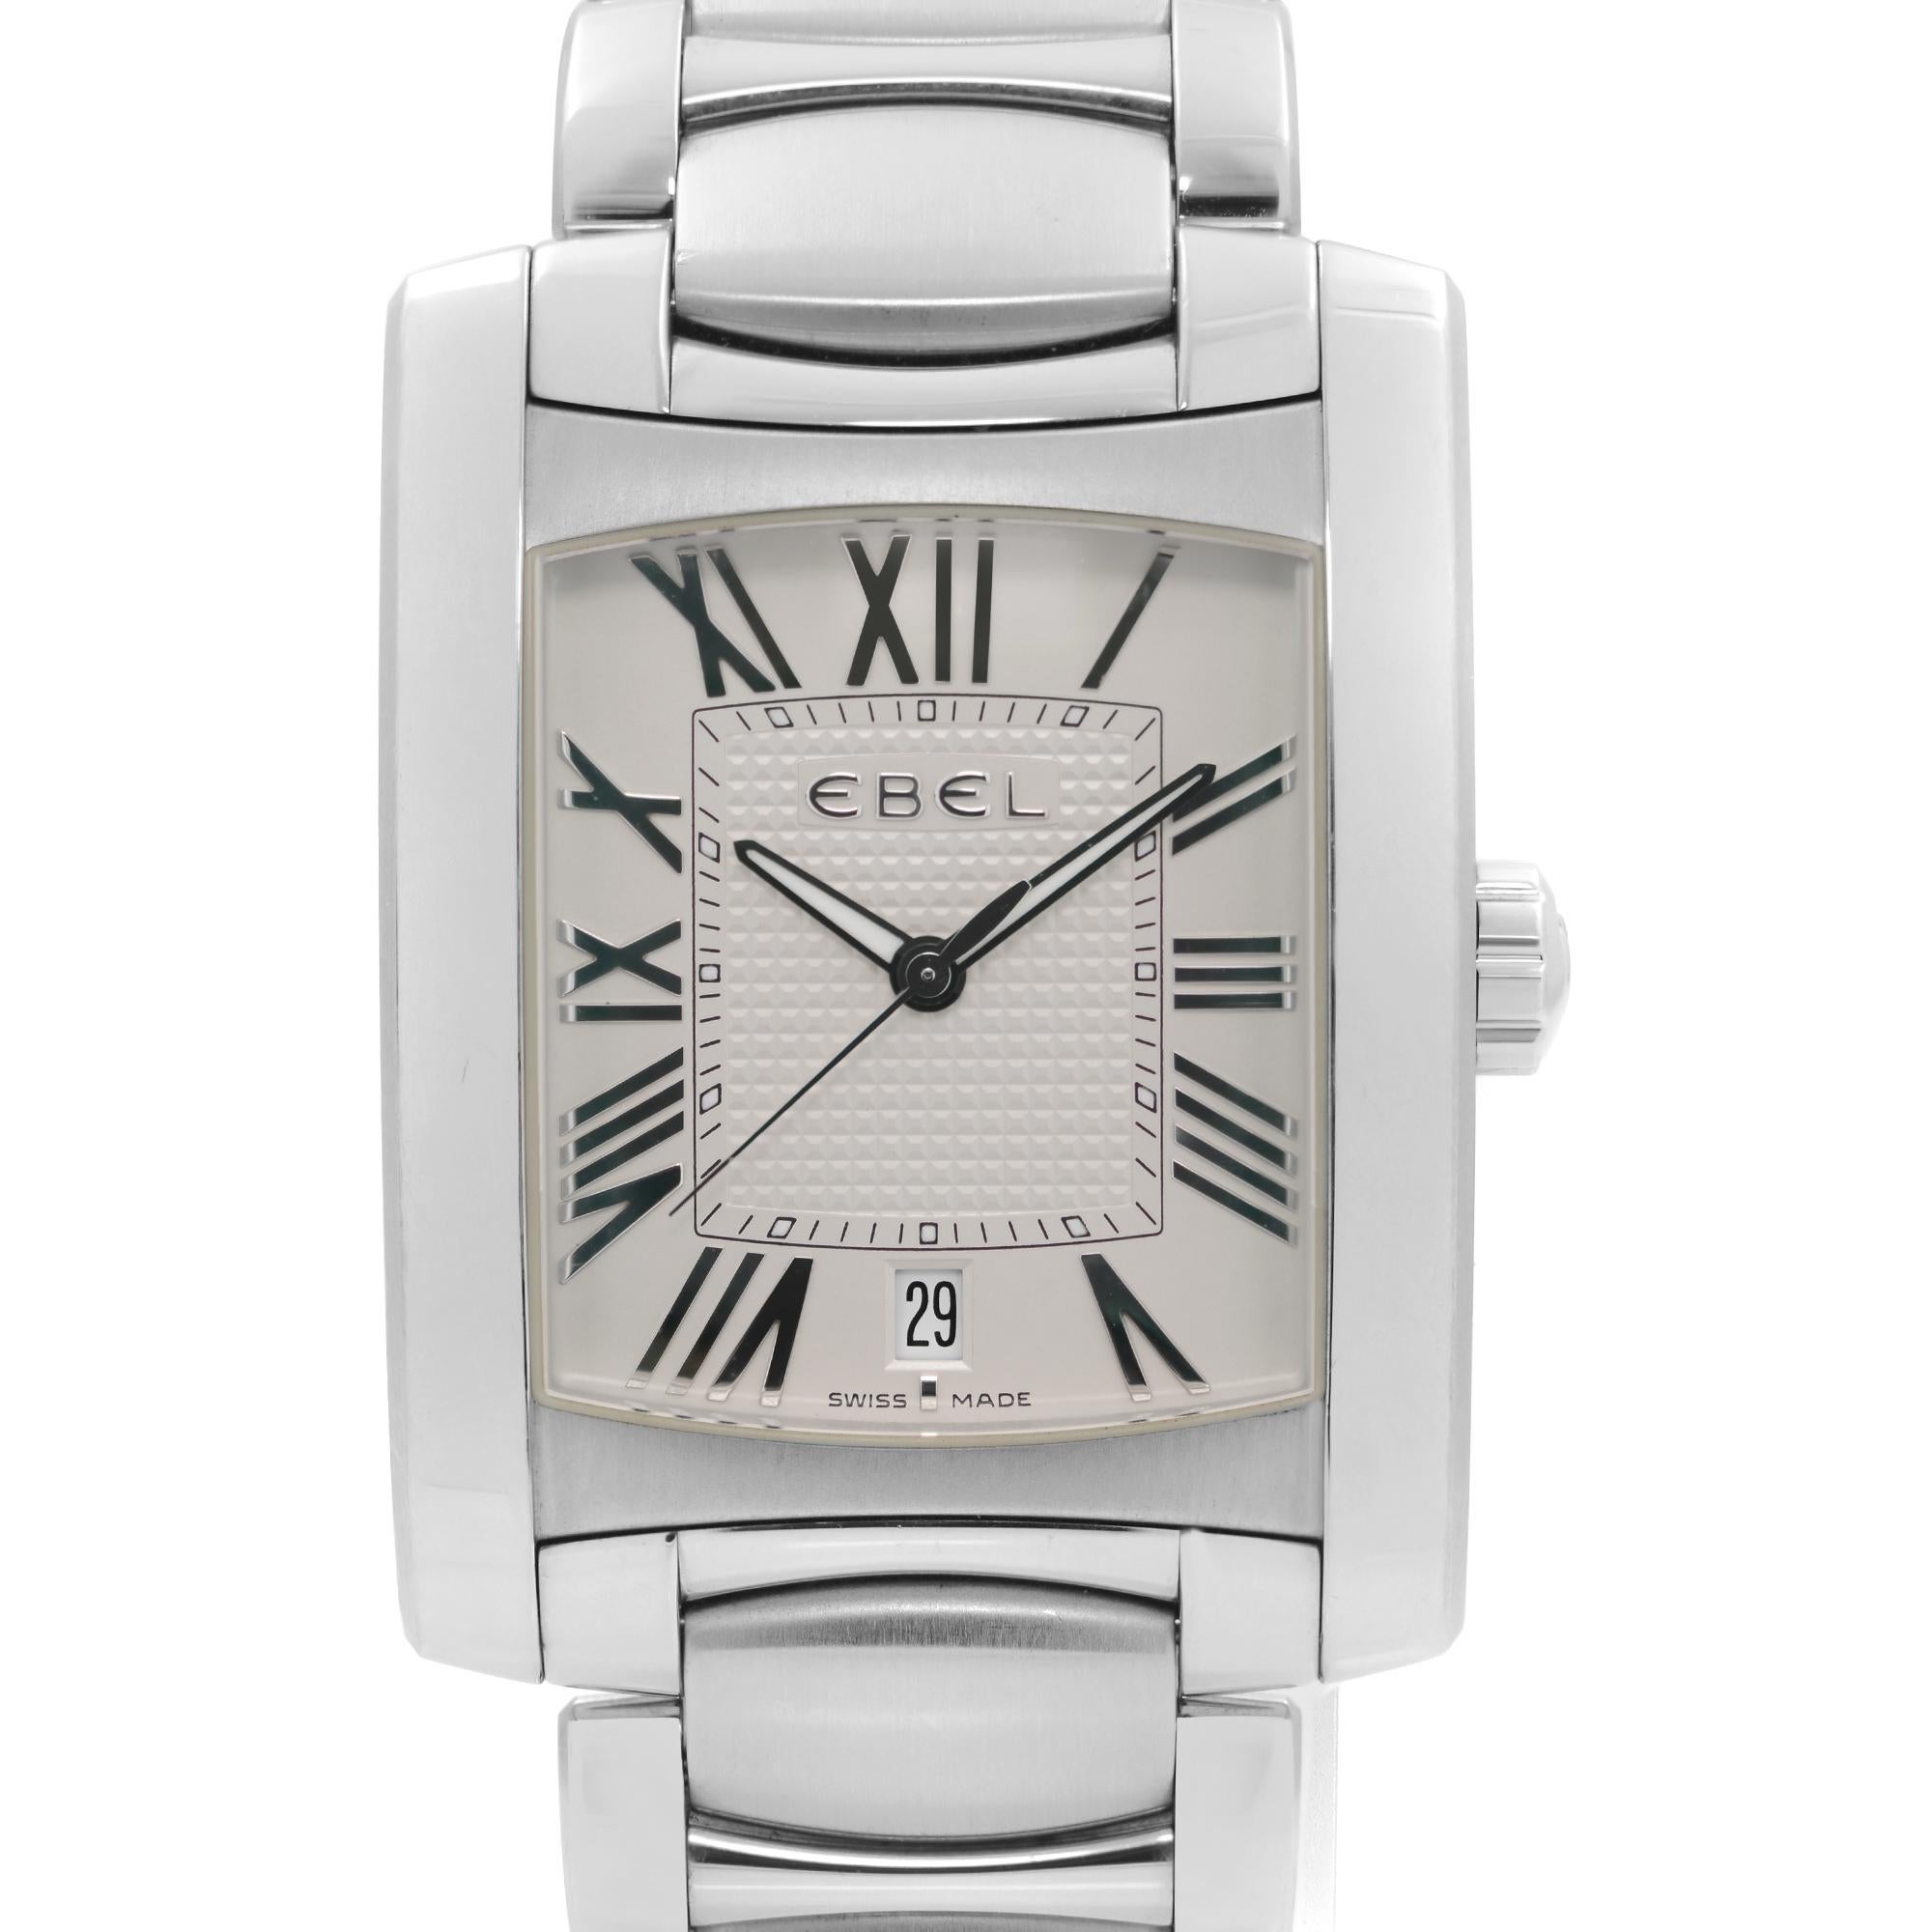 Pre Owned Ebel Brasilia Stainless Steel White Roman Numeral Dial Quartz Men Watch E9255M41. This Beautiful Timepiece Features: Stainless Steel Case & Bracelet, Fixed Smooth Stainless Steel Bezel, White Dial with Luminous Silver-Tone Hands, and Roman